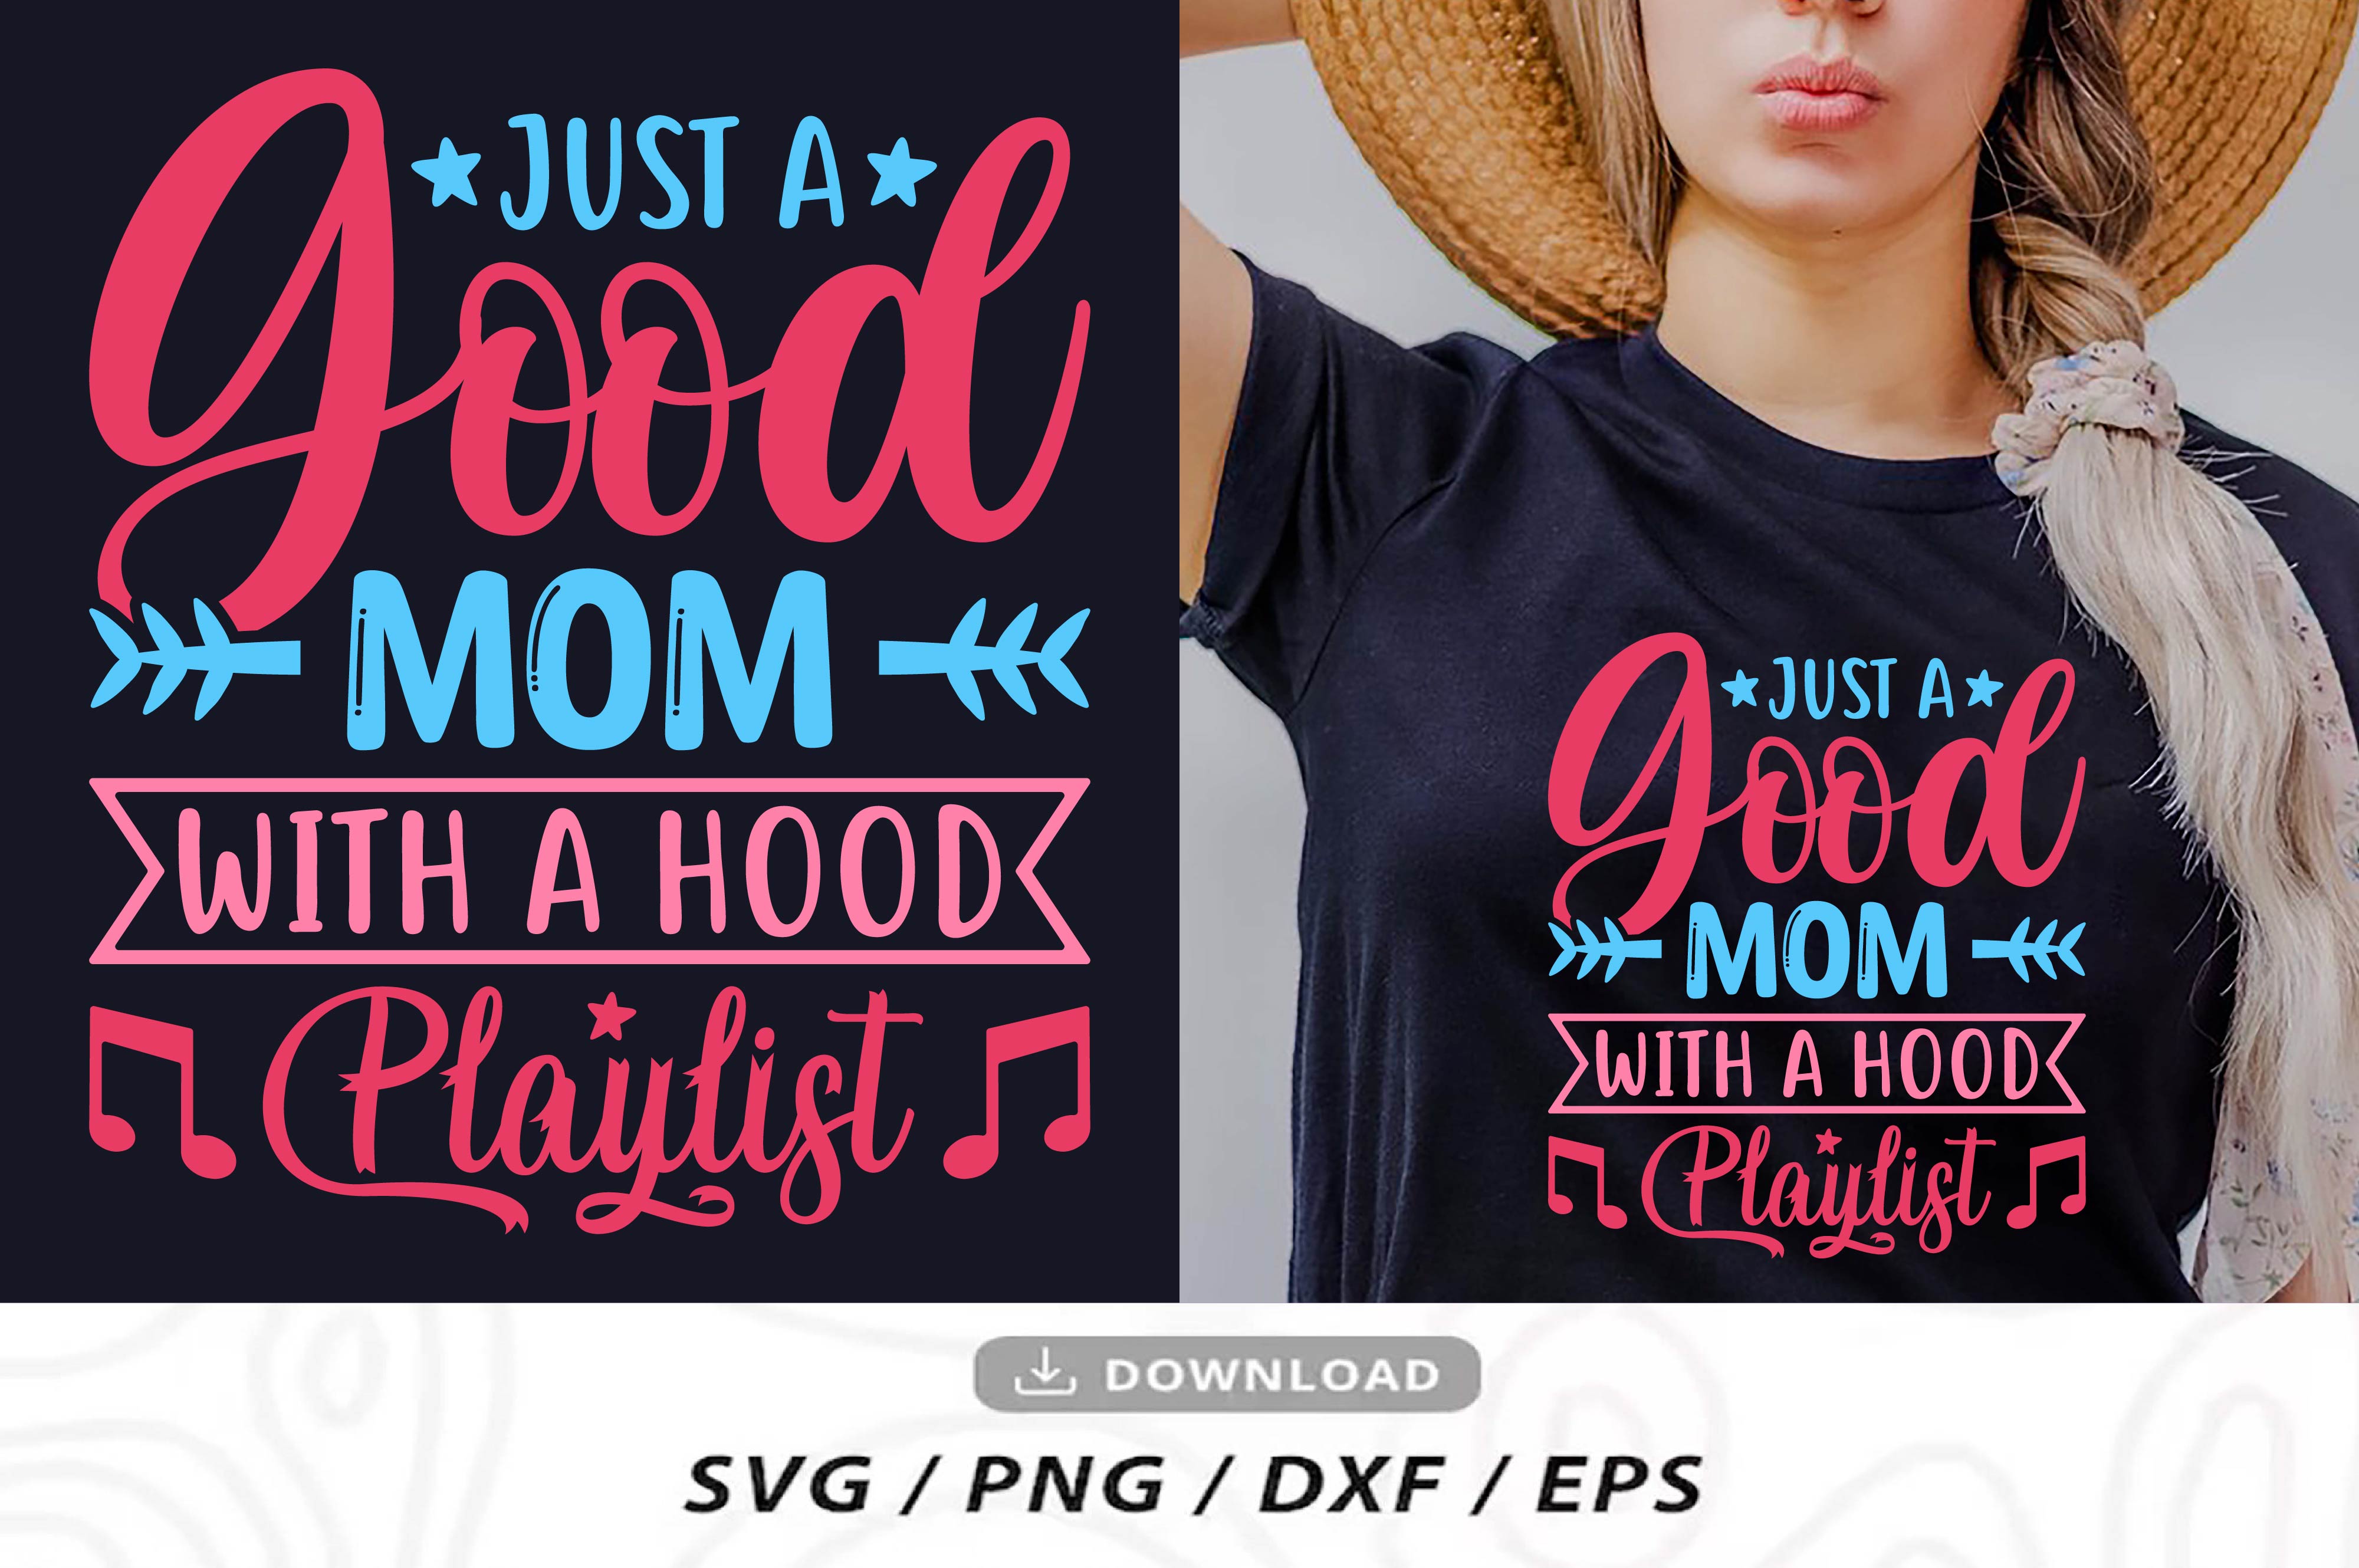 Woman wearing a t - shirt that says just a good mom with a hood.